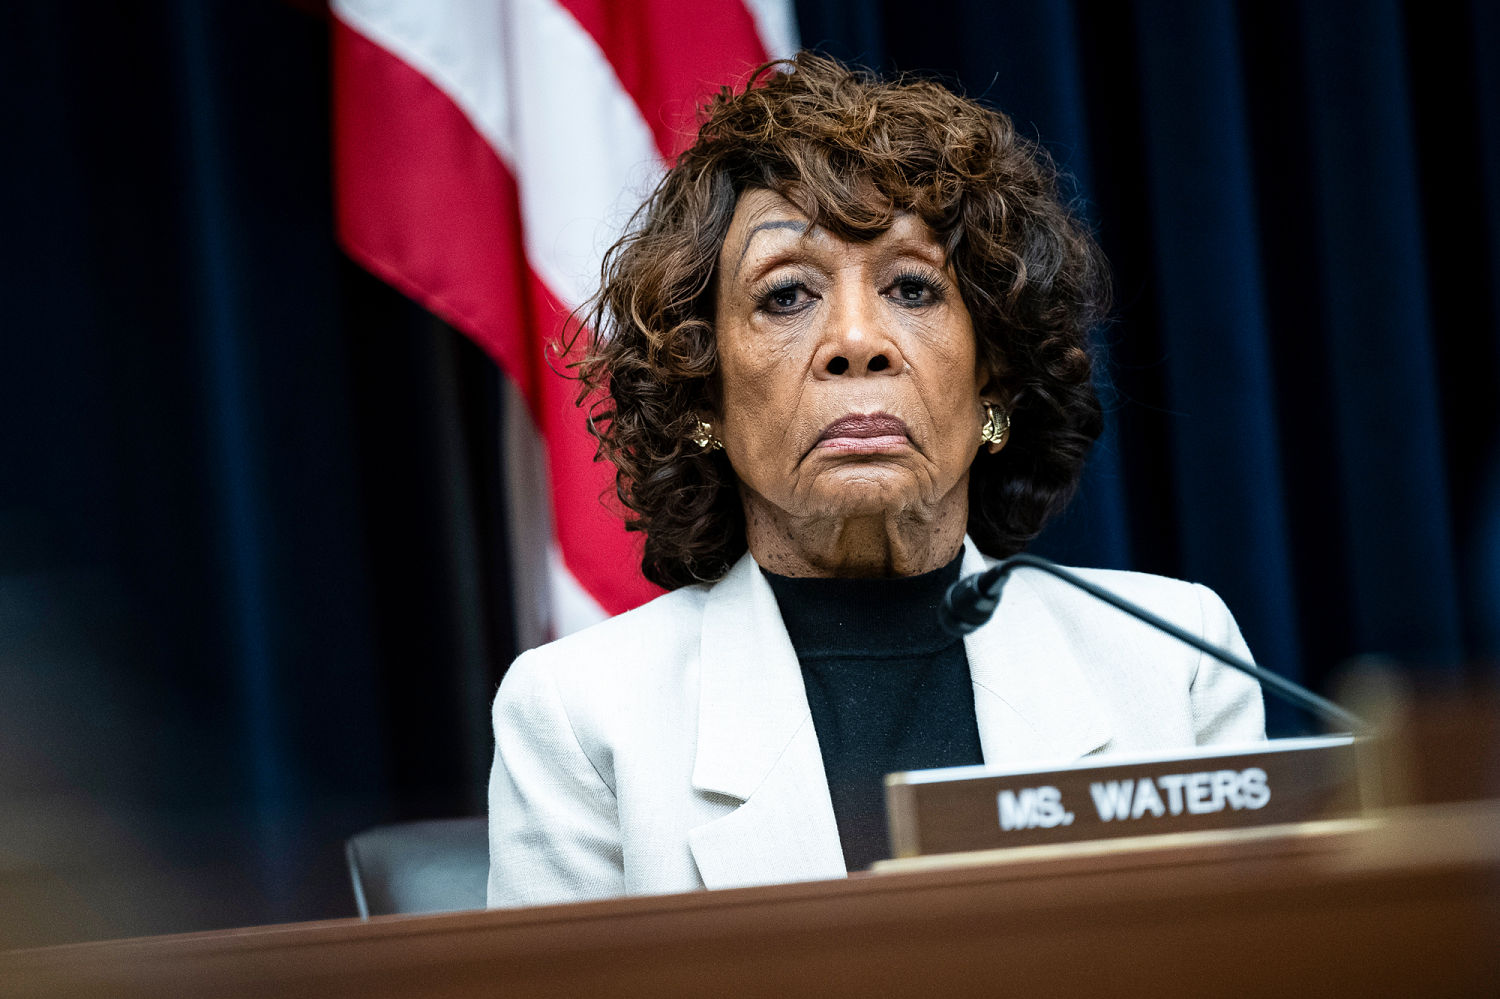 Rep. Maxine Waters said she had nightmares over Texas man's threats on her life as he's sentenced to prison